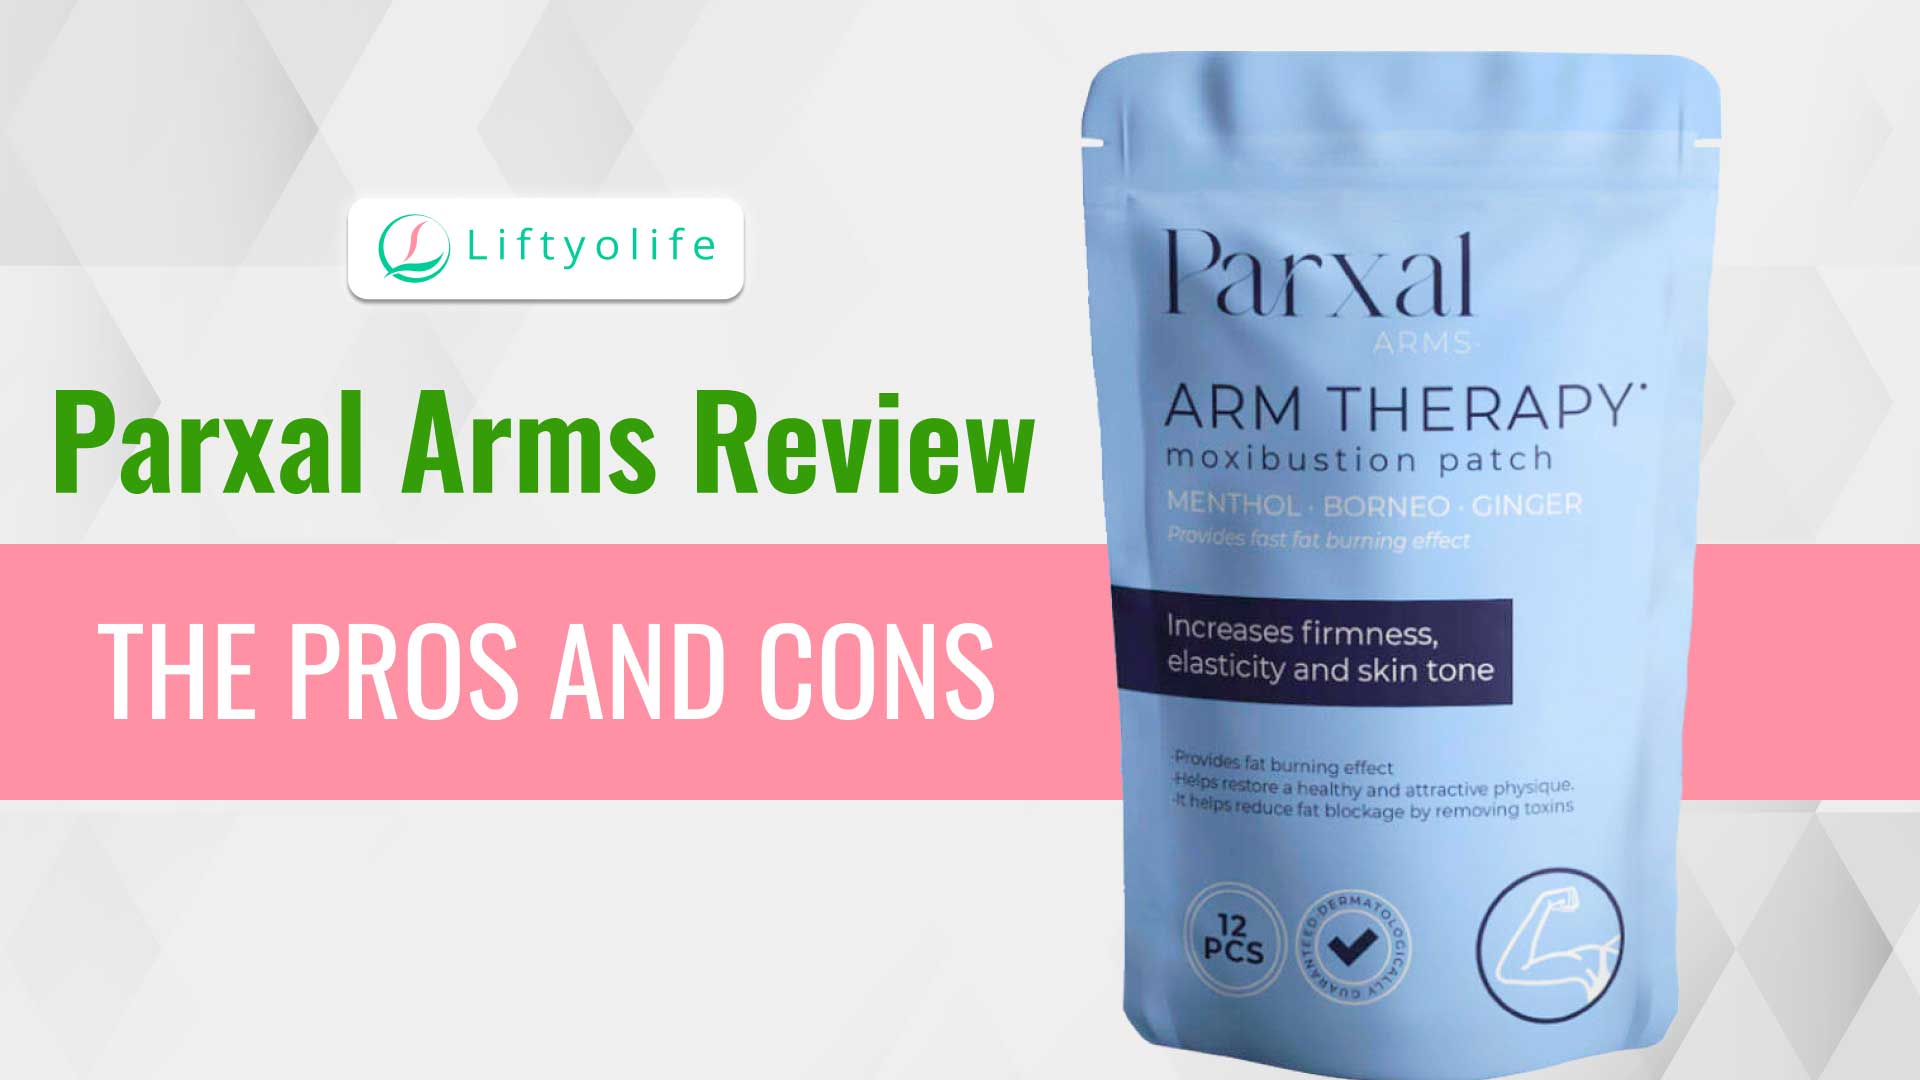 Pros And Cons Of Parxal Arms